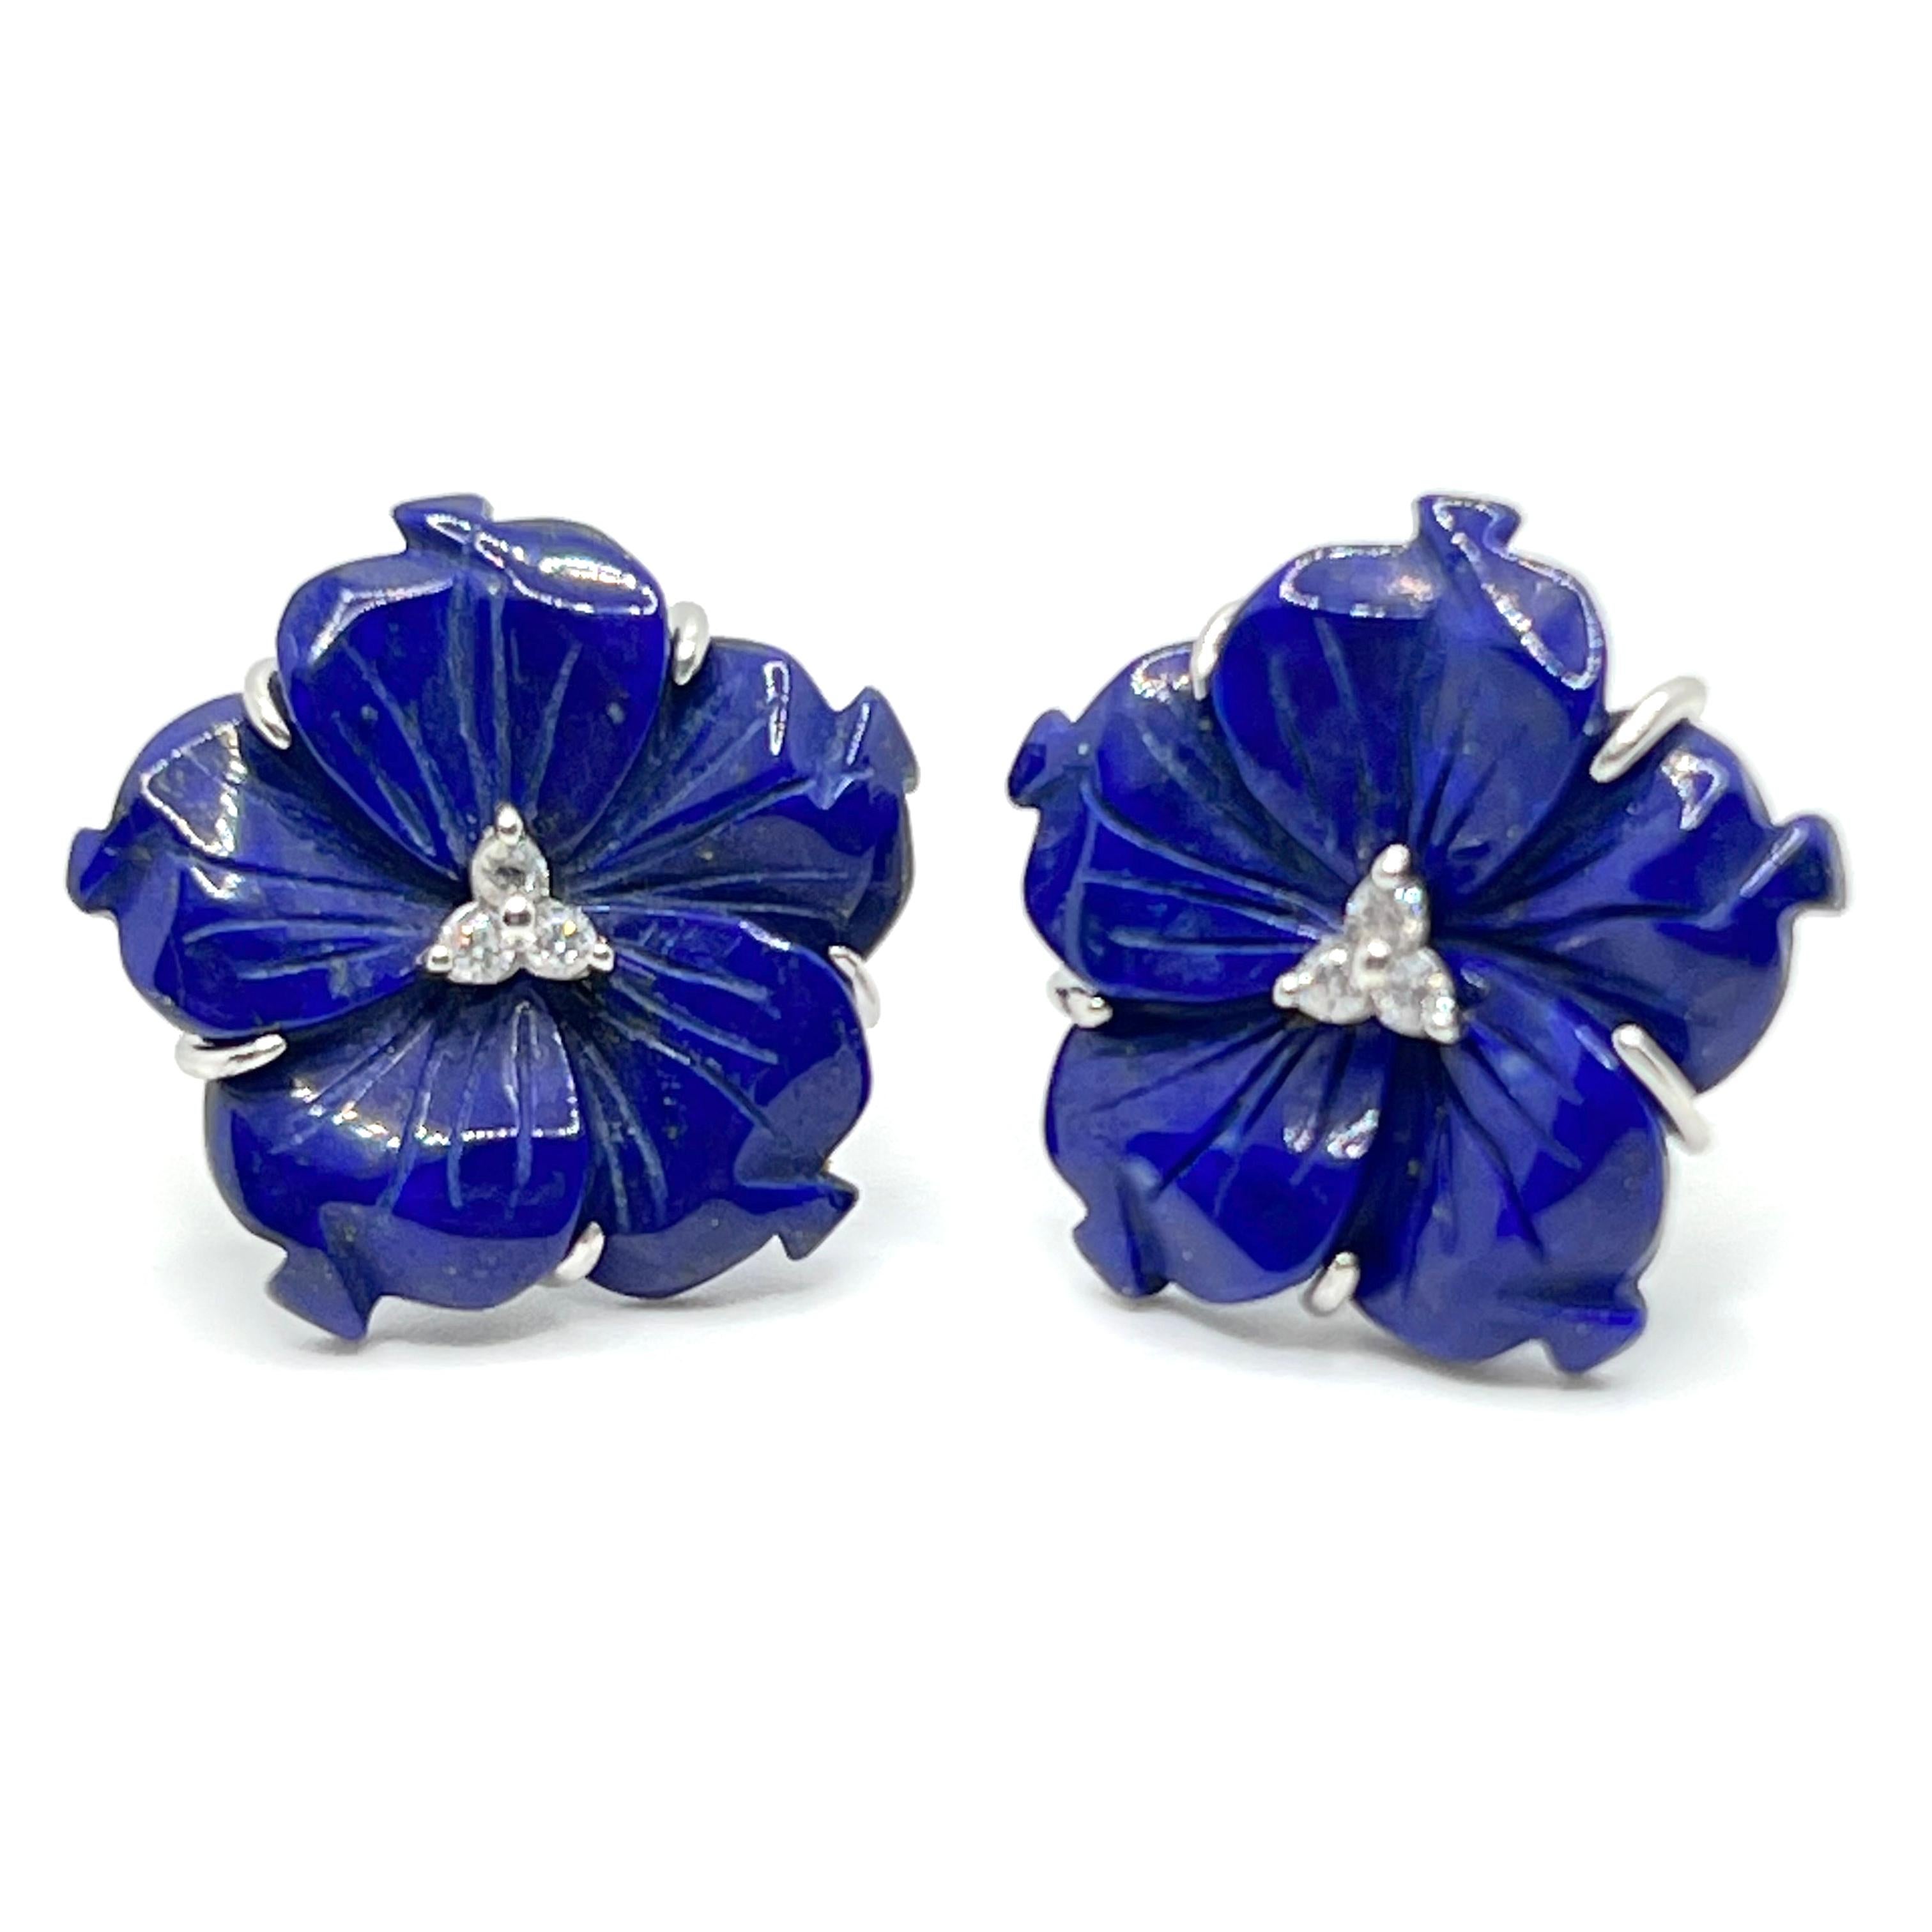 Elegant 24mm Carved Lapis Lazuli Flower Earrings

This gorgeous pair of earrings features 24mm lapis lazuli carved into beautiful 3D flower, adorned with round simulated diamonds in the center, handset in platinum rhodium plated sterling silver.